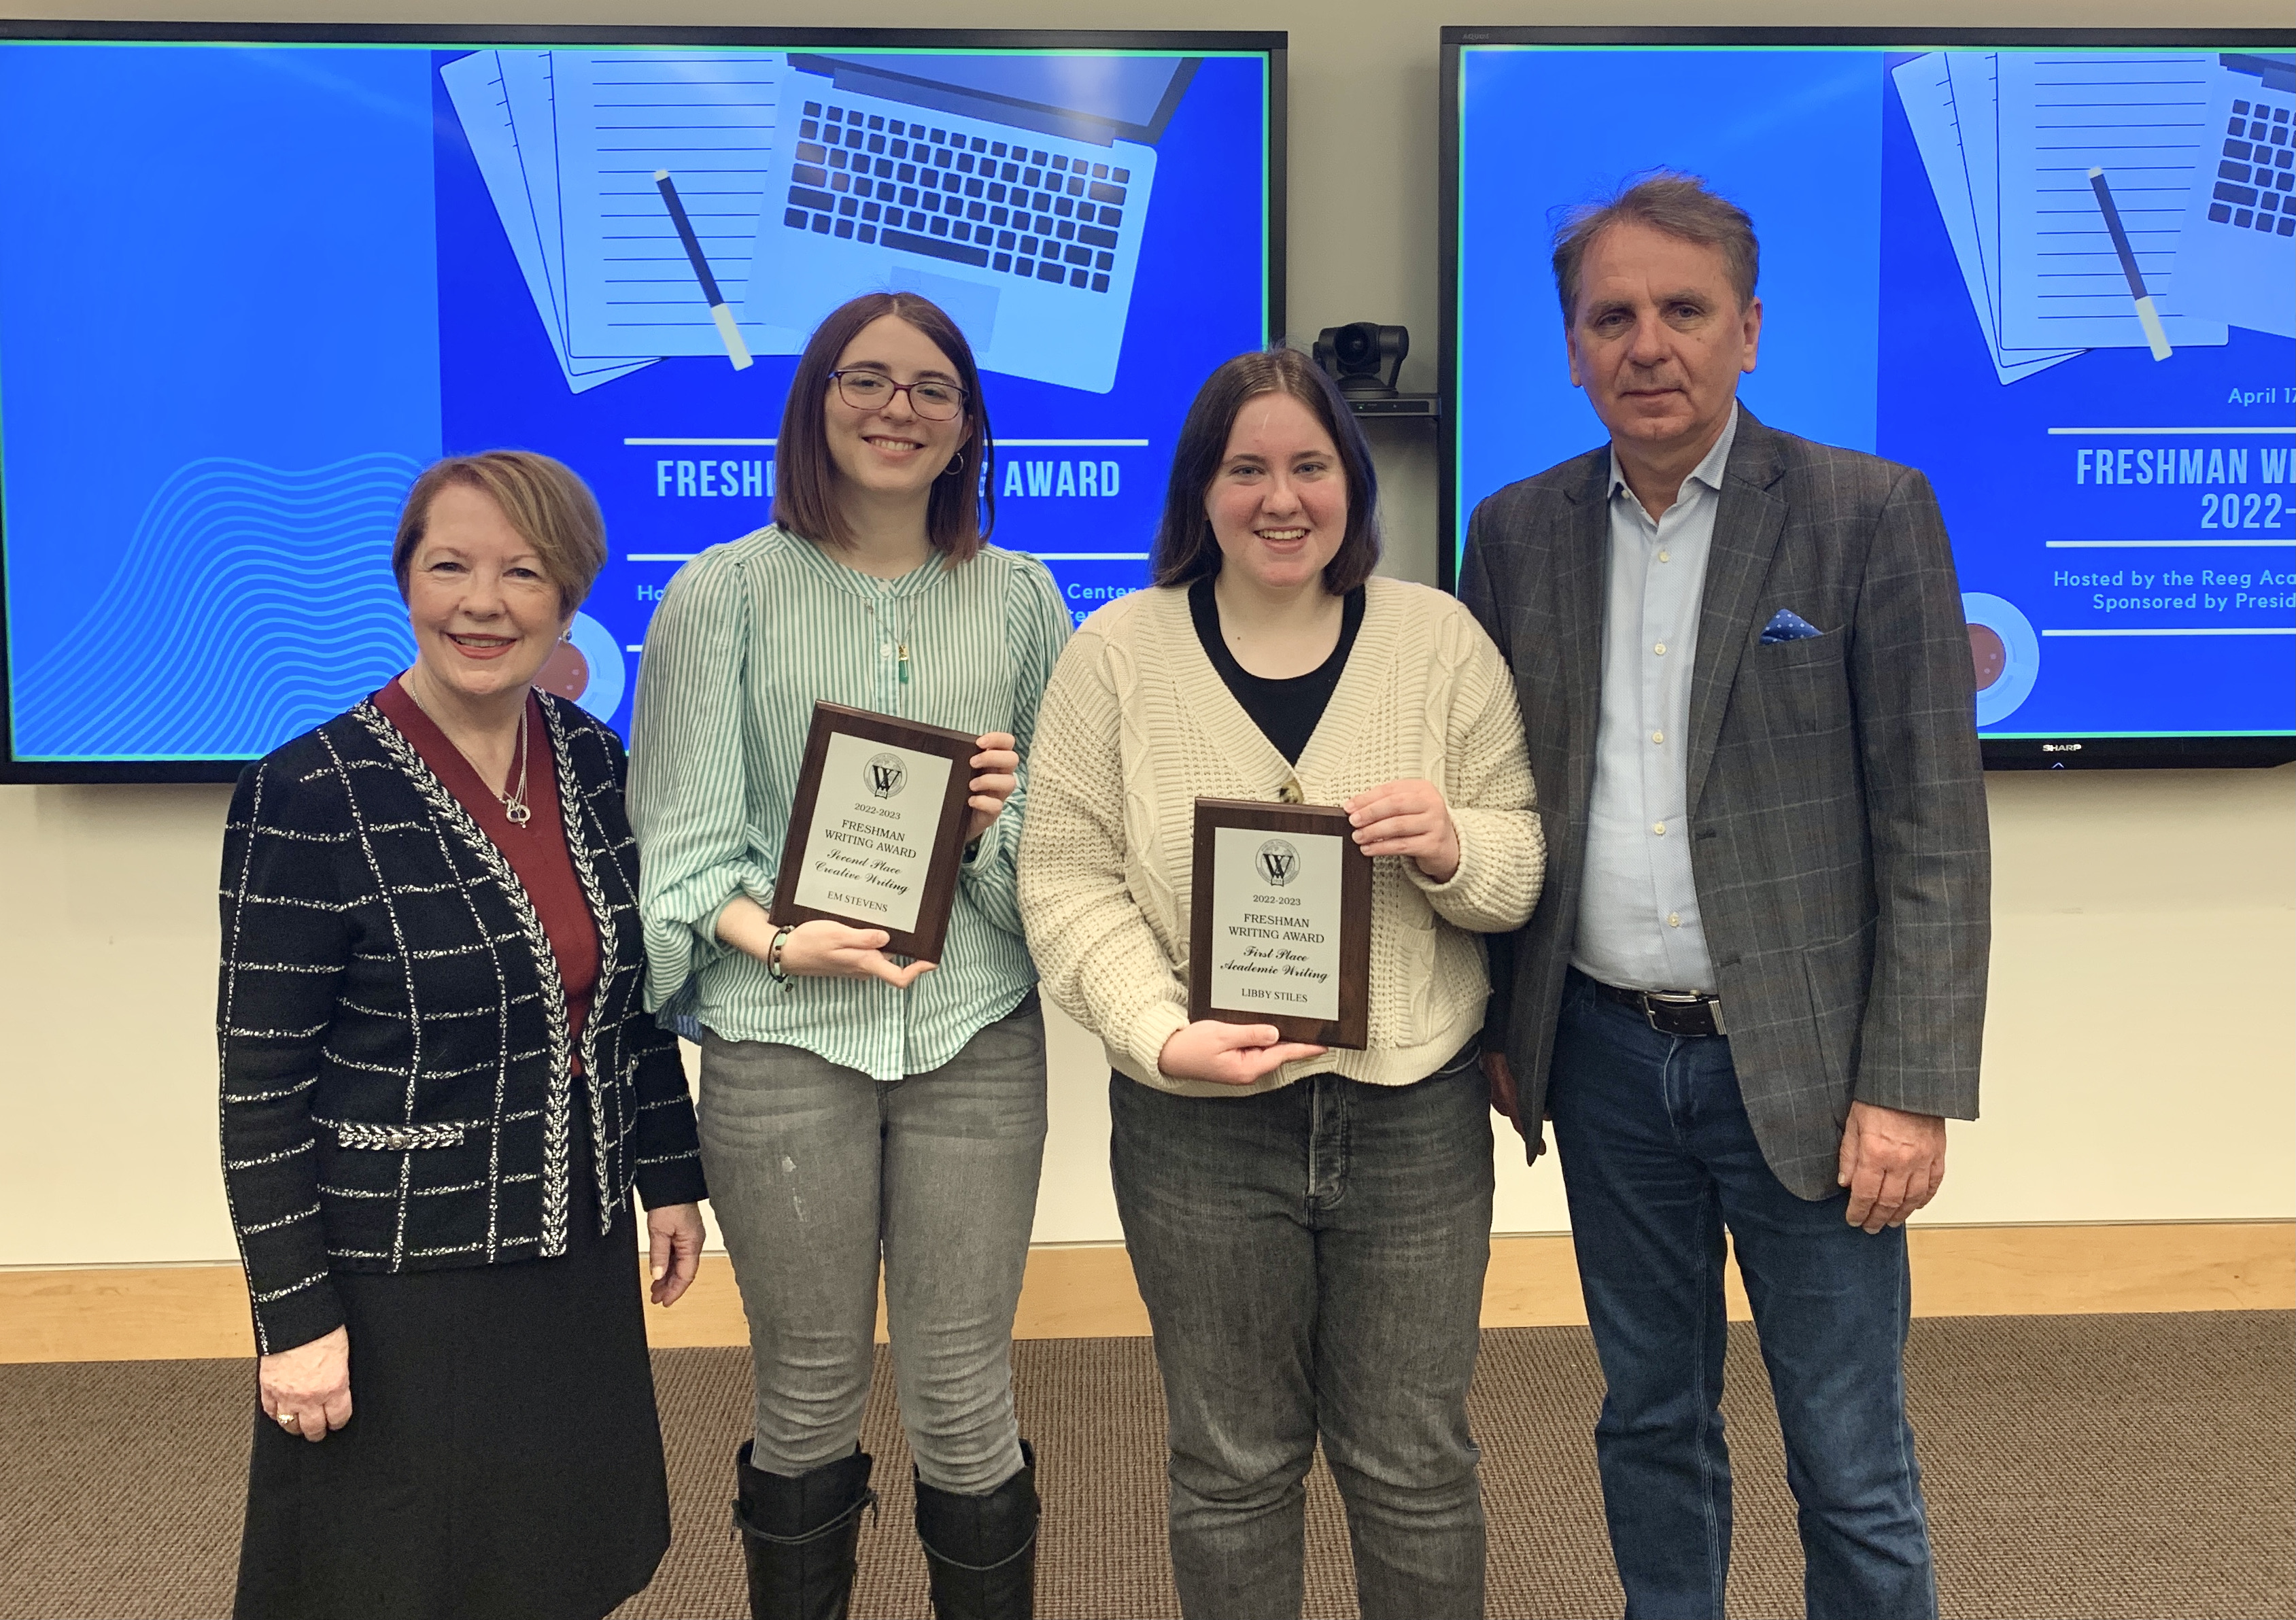 Pictured are Chancellor Stroble, Second Place in Creative Writing winner Em Stevens, First Place in Academic Writing Libby Stiles, and President Schuster.